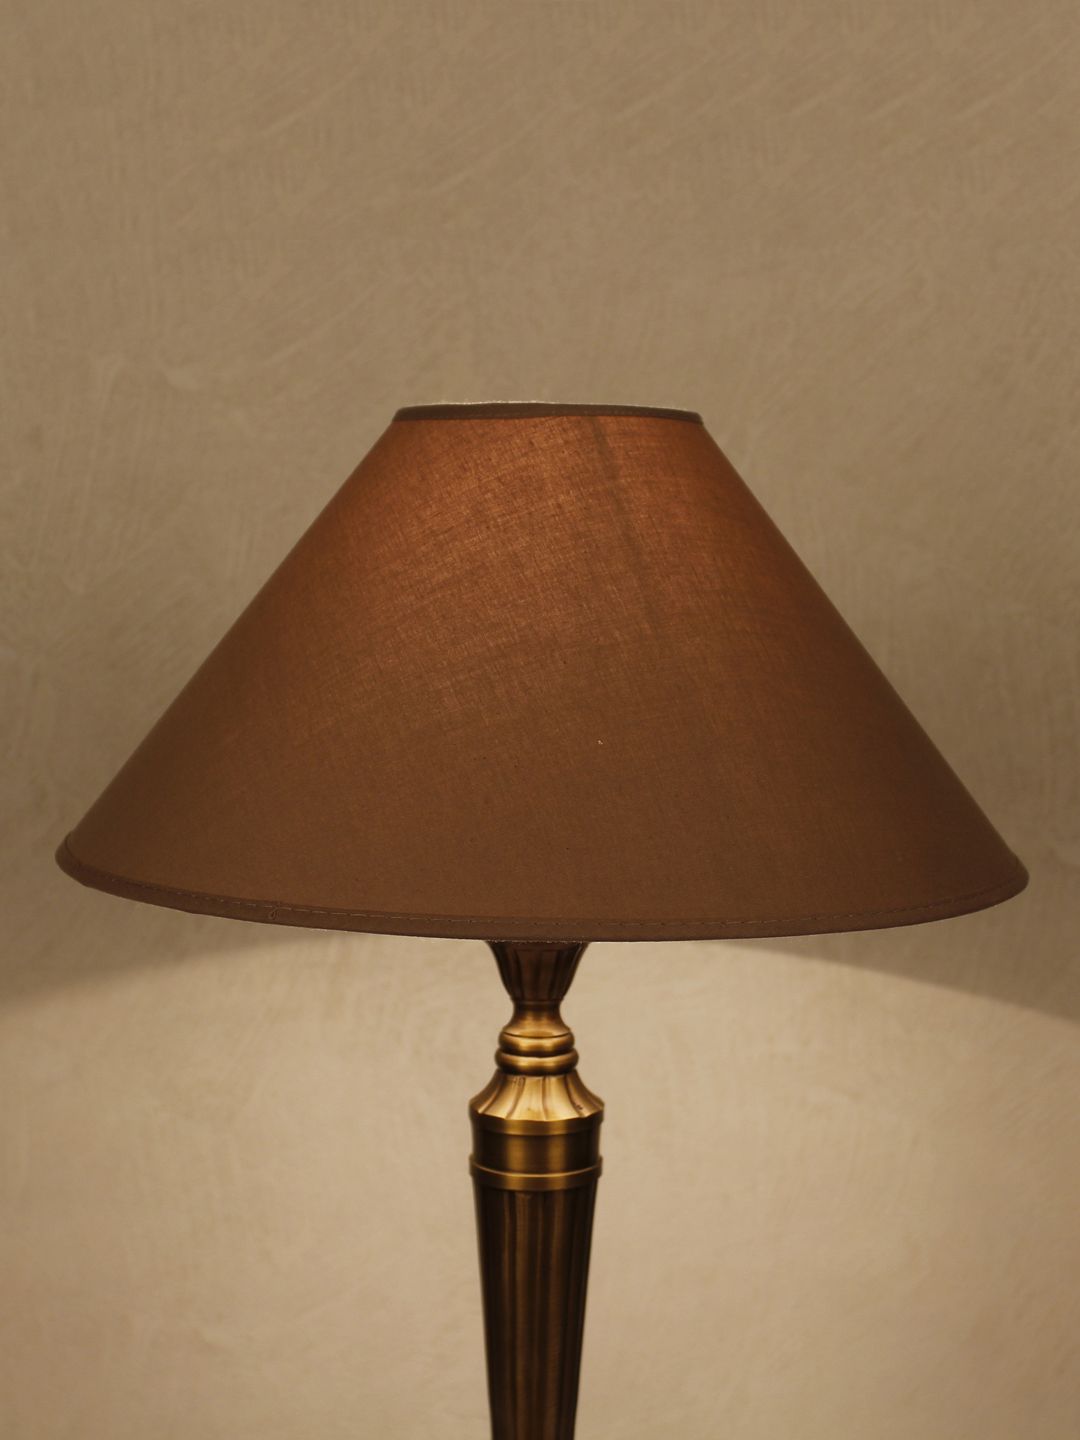 THE LIGHT STORE Beige Table Top Lamp Shade Price in India